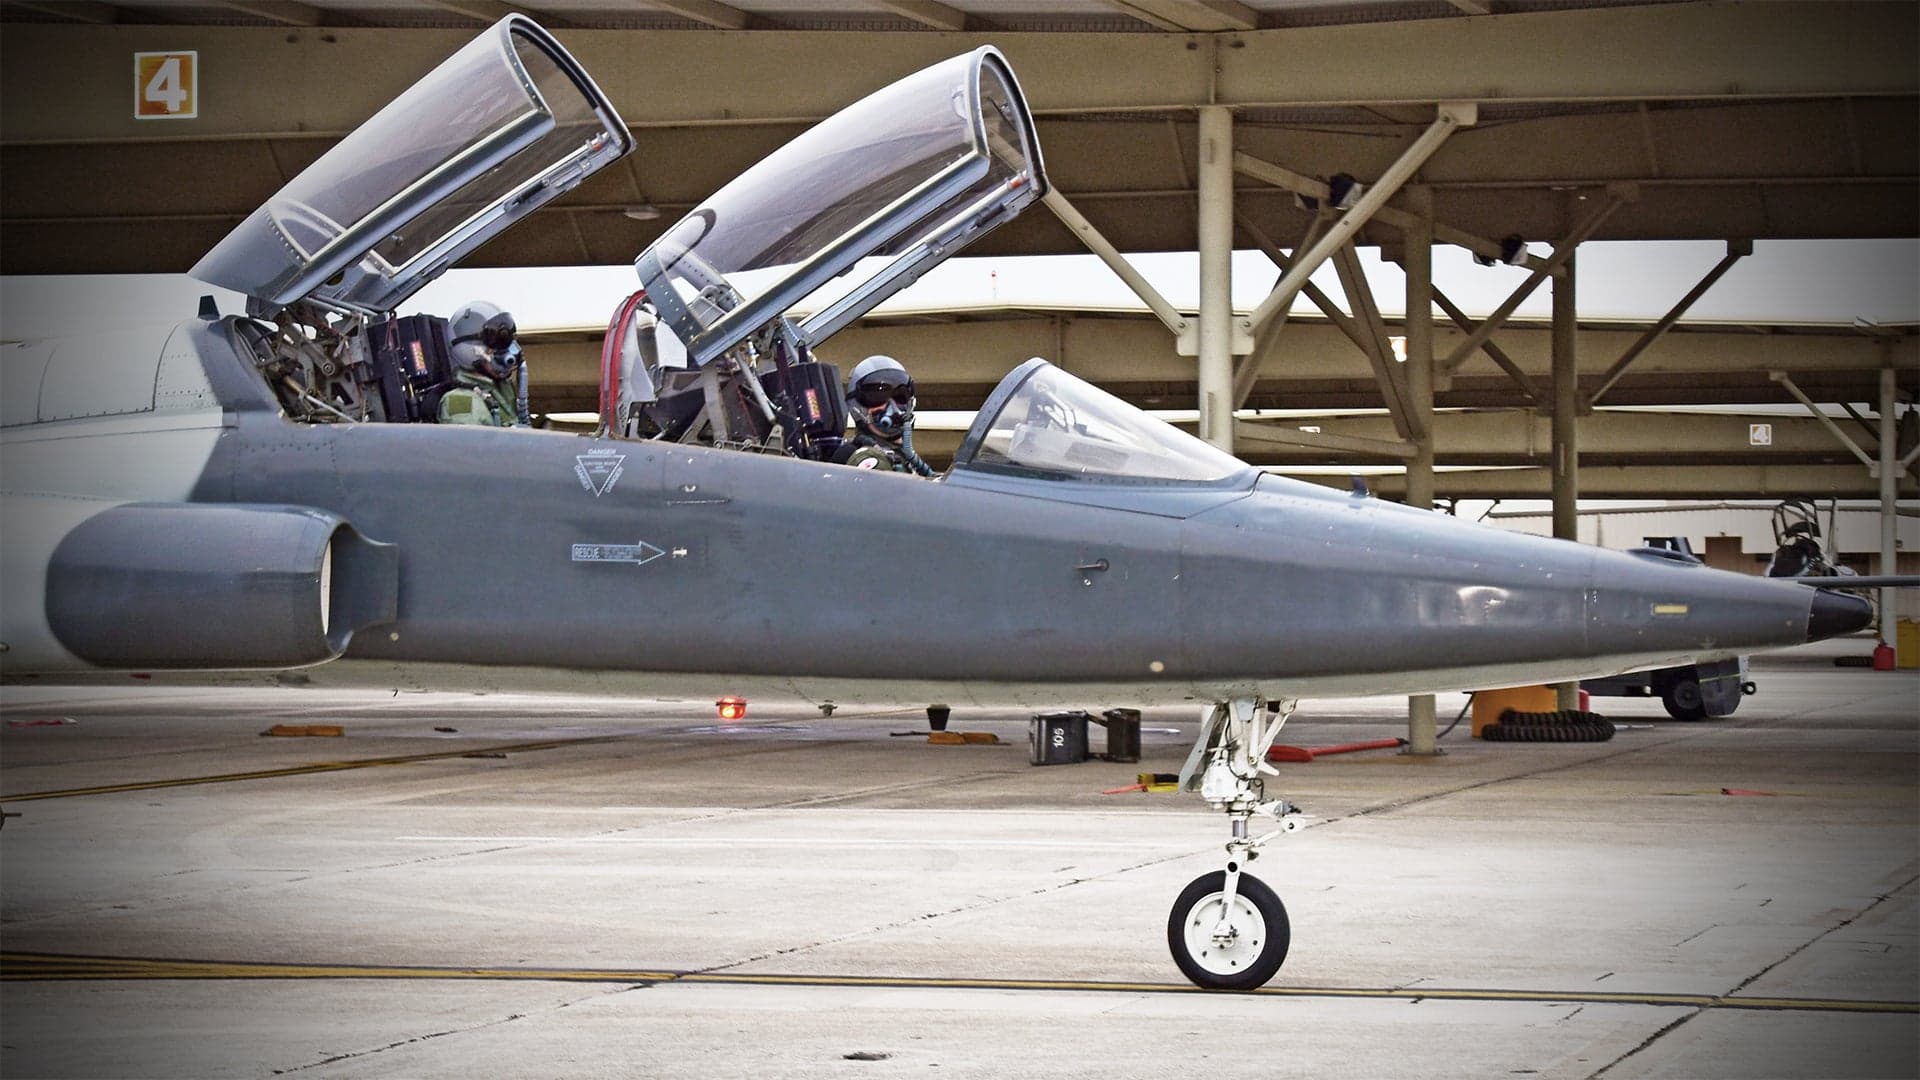 Fighter Pilots Warn Of Newly Trained Pilots’ Lack Of Actual Flying Experience